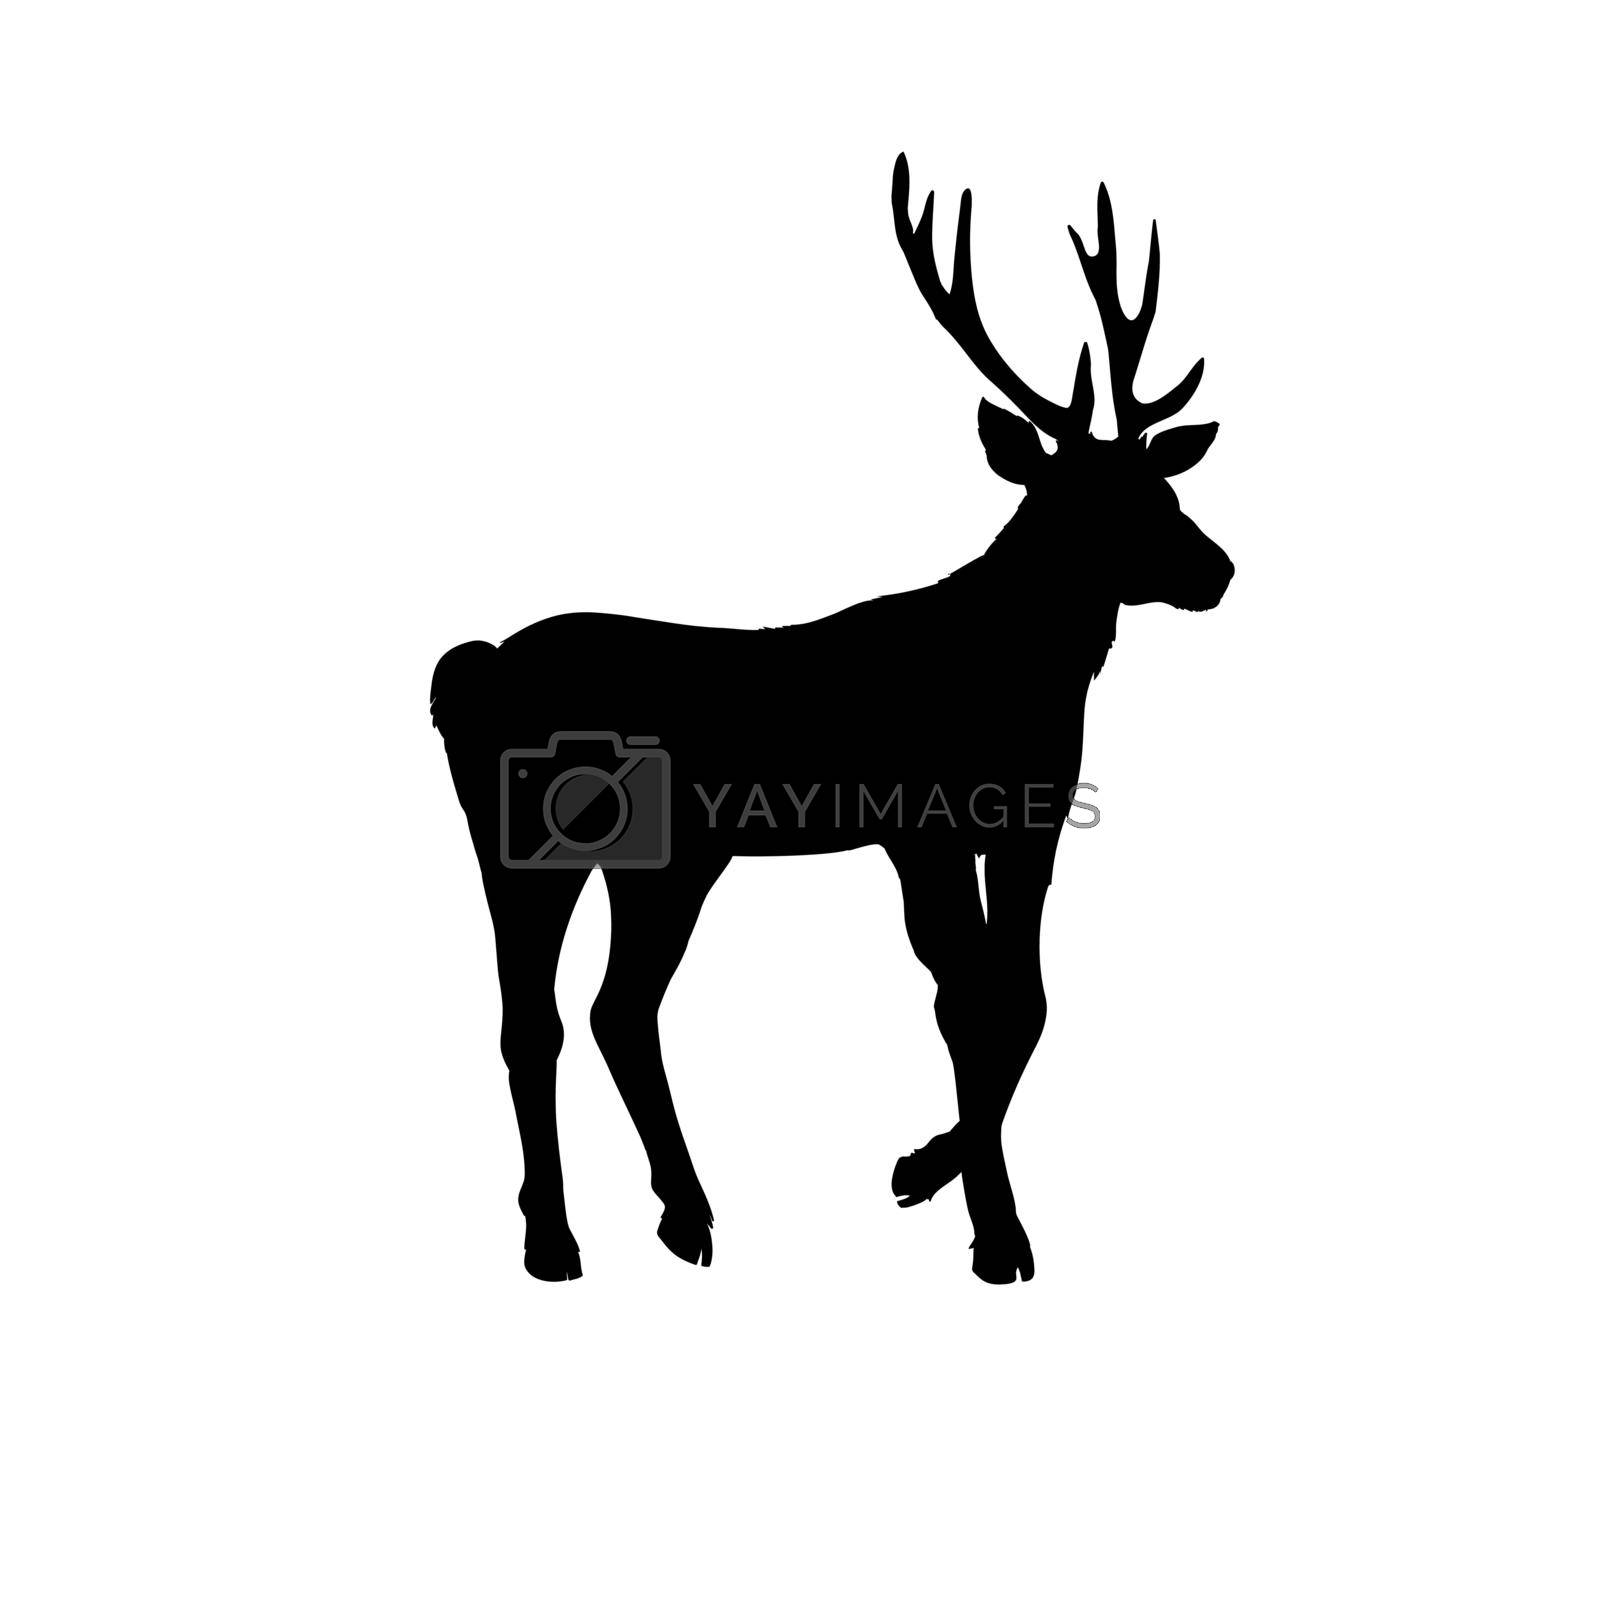 Royalty free image of vector large collection of deer silhouettes by Vladimir90